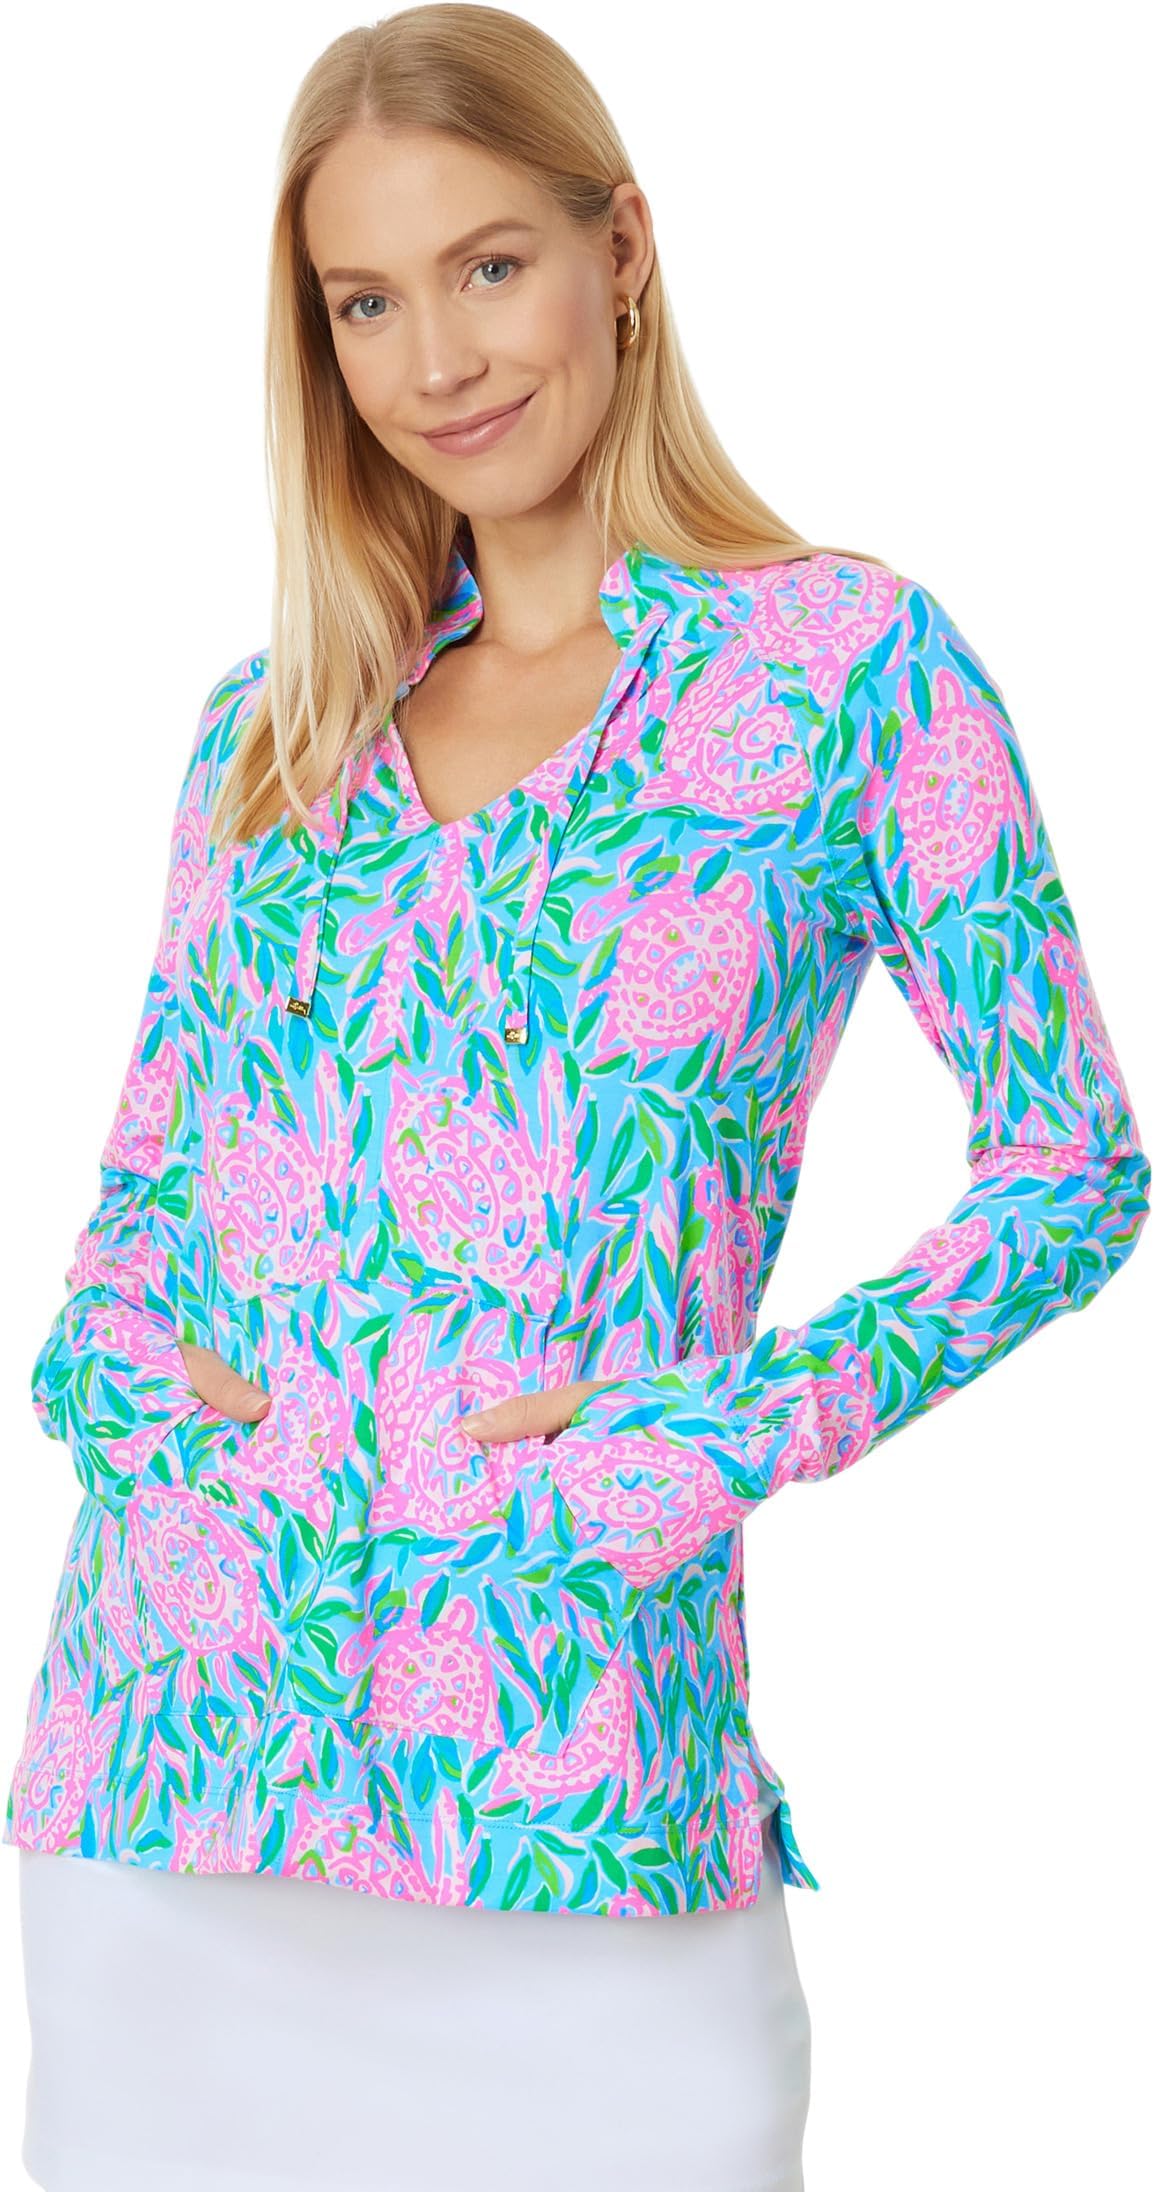 Cassi UPF 50+ Поповер Lilly Pulitzer, цвет Frenchie Blue Turtley in Love